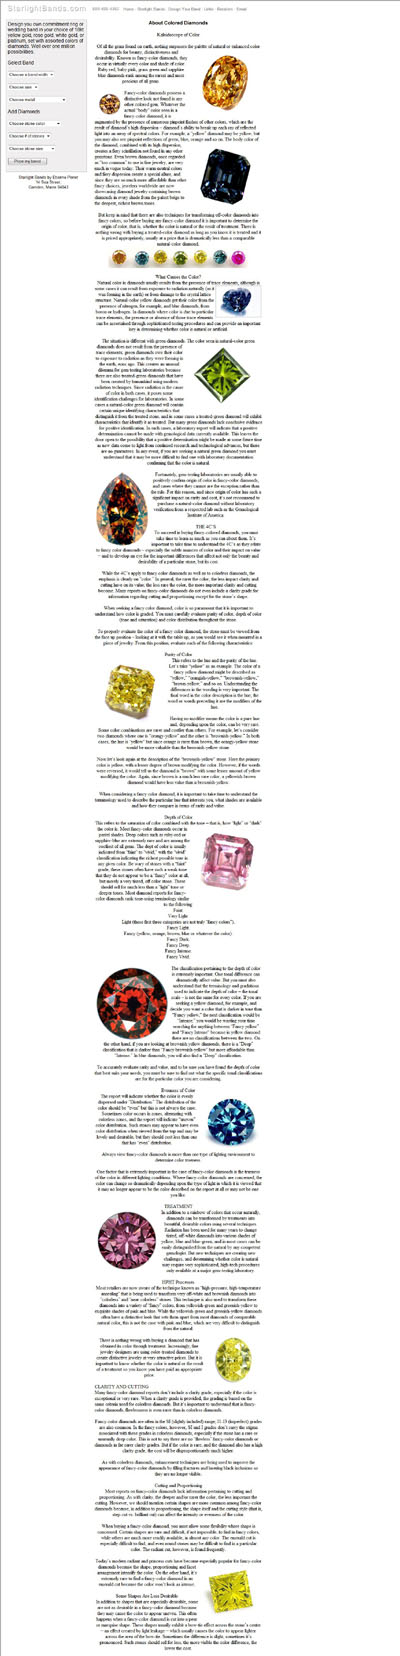 Starlight Bands (starlightbands.com) About Colored Diamonds Page Using Our Pink Diamond